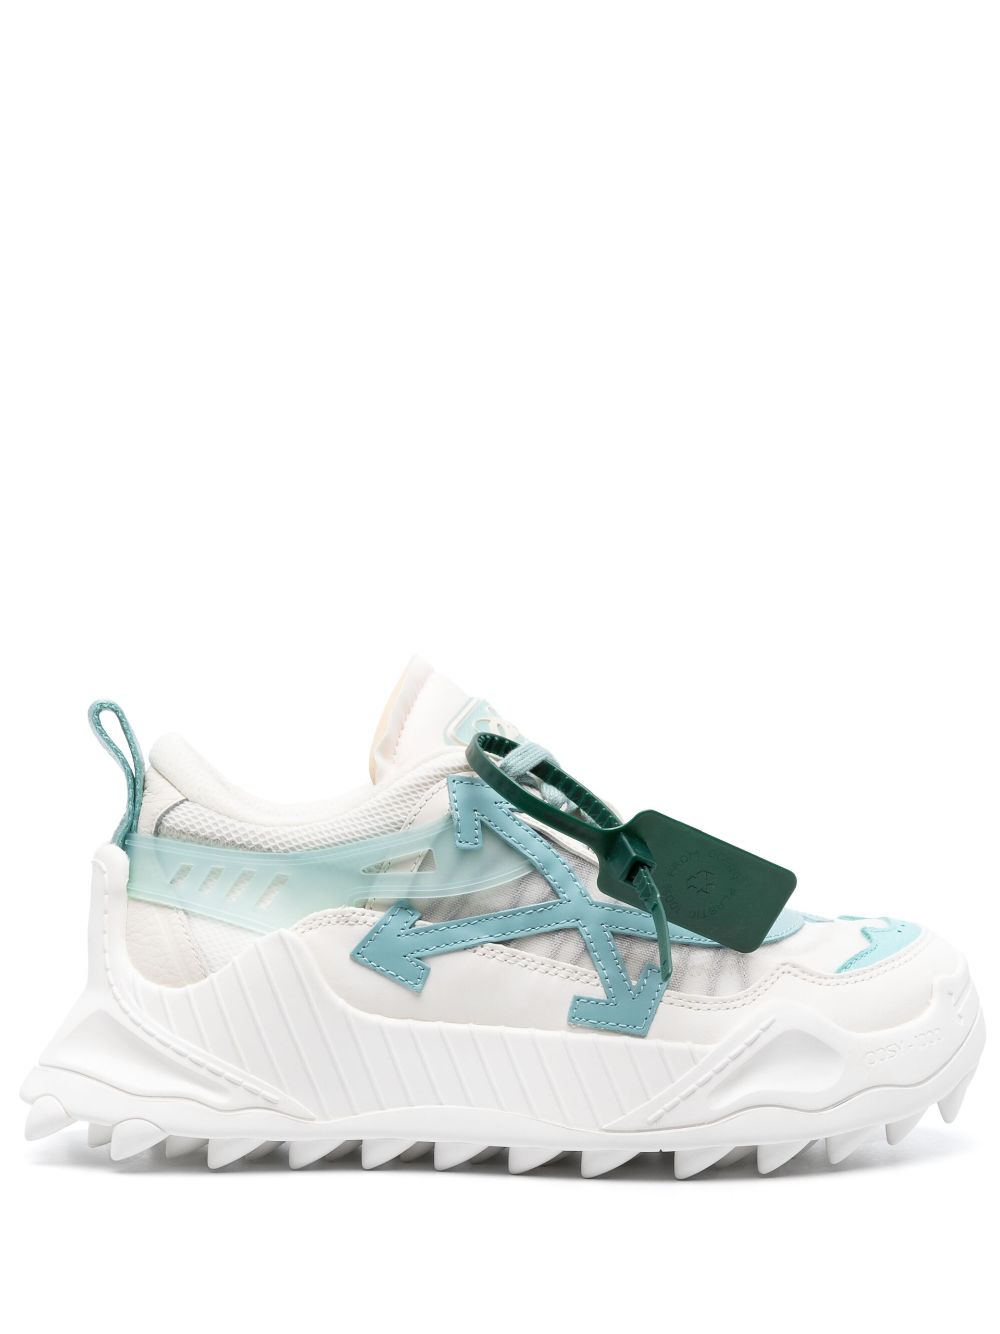 OFF-WHITE ODSY 1000 LOW-TOP SNEAKERS